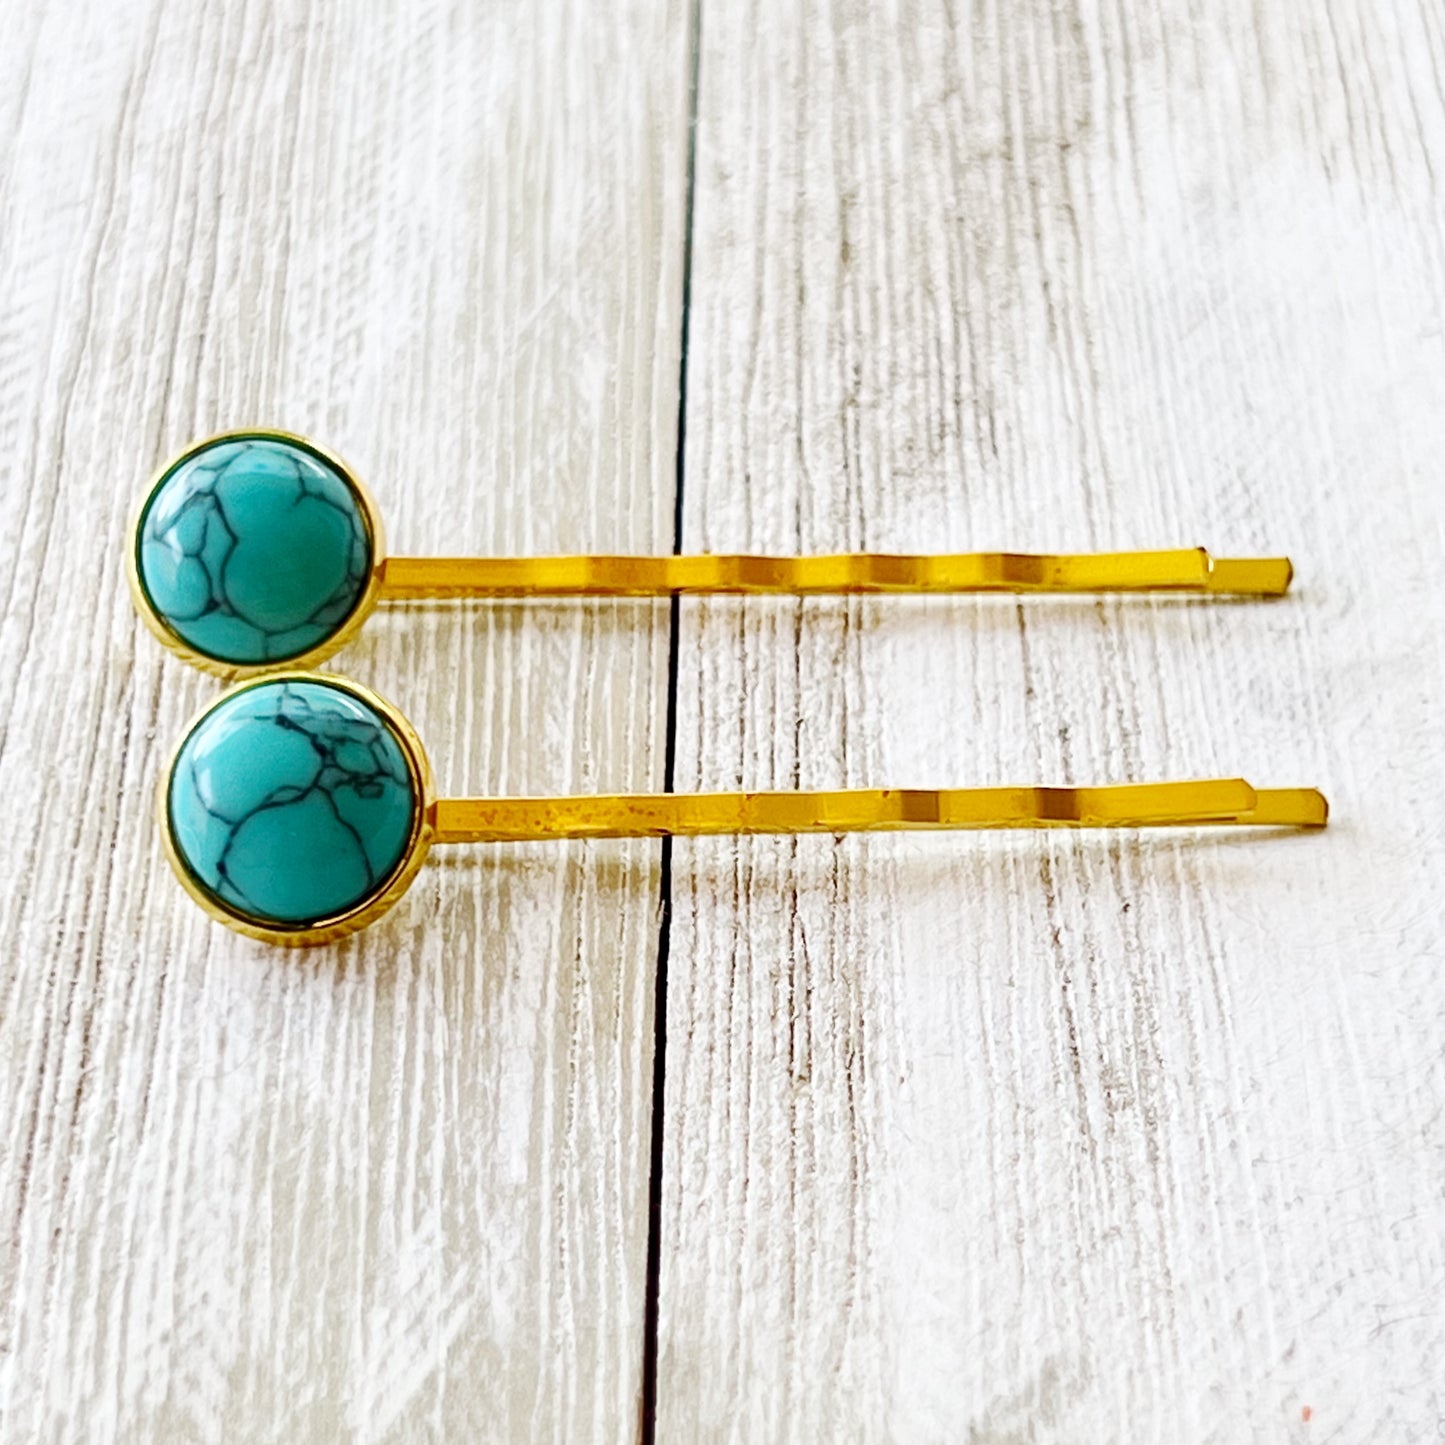 Turquoise Hair Pins - Western Cowgirl Decorative Gold Bobby Pin, Women's Southwestern Hair Accessories